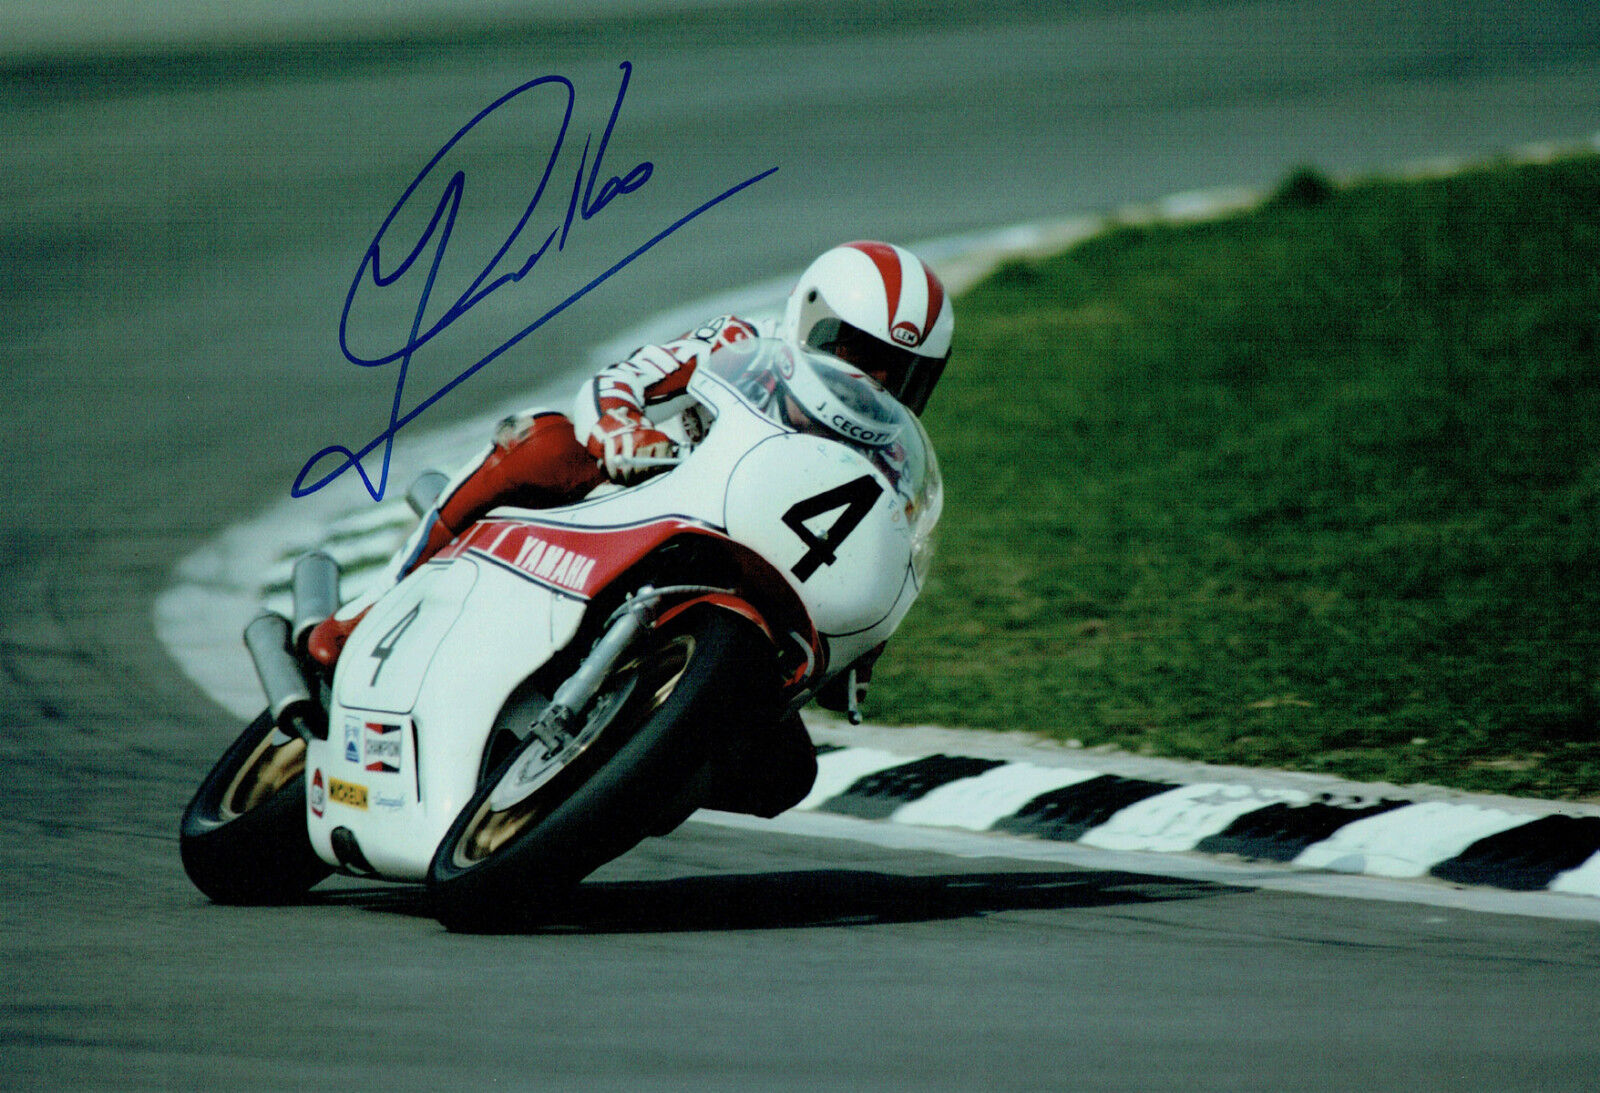 Johnny CECOTTO SIGNED Autograph 12x8 Race Photo Poster painting AFTAL COA Misano ITALY